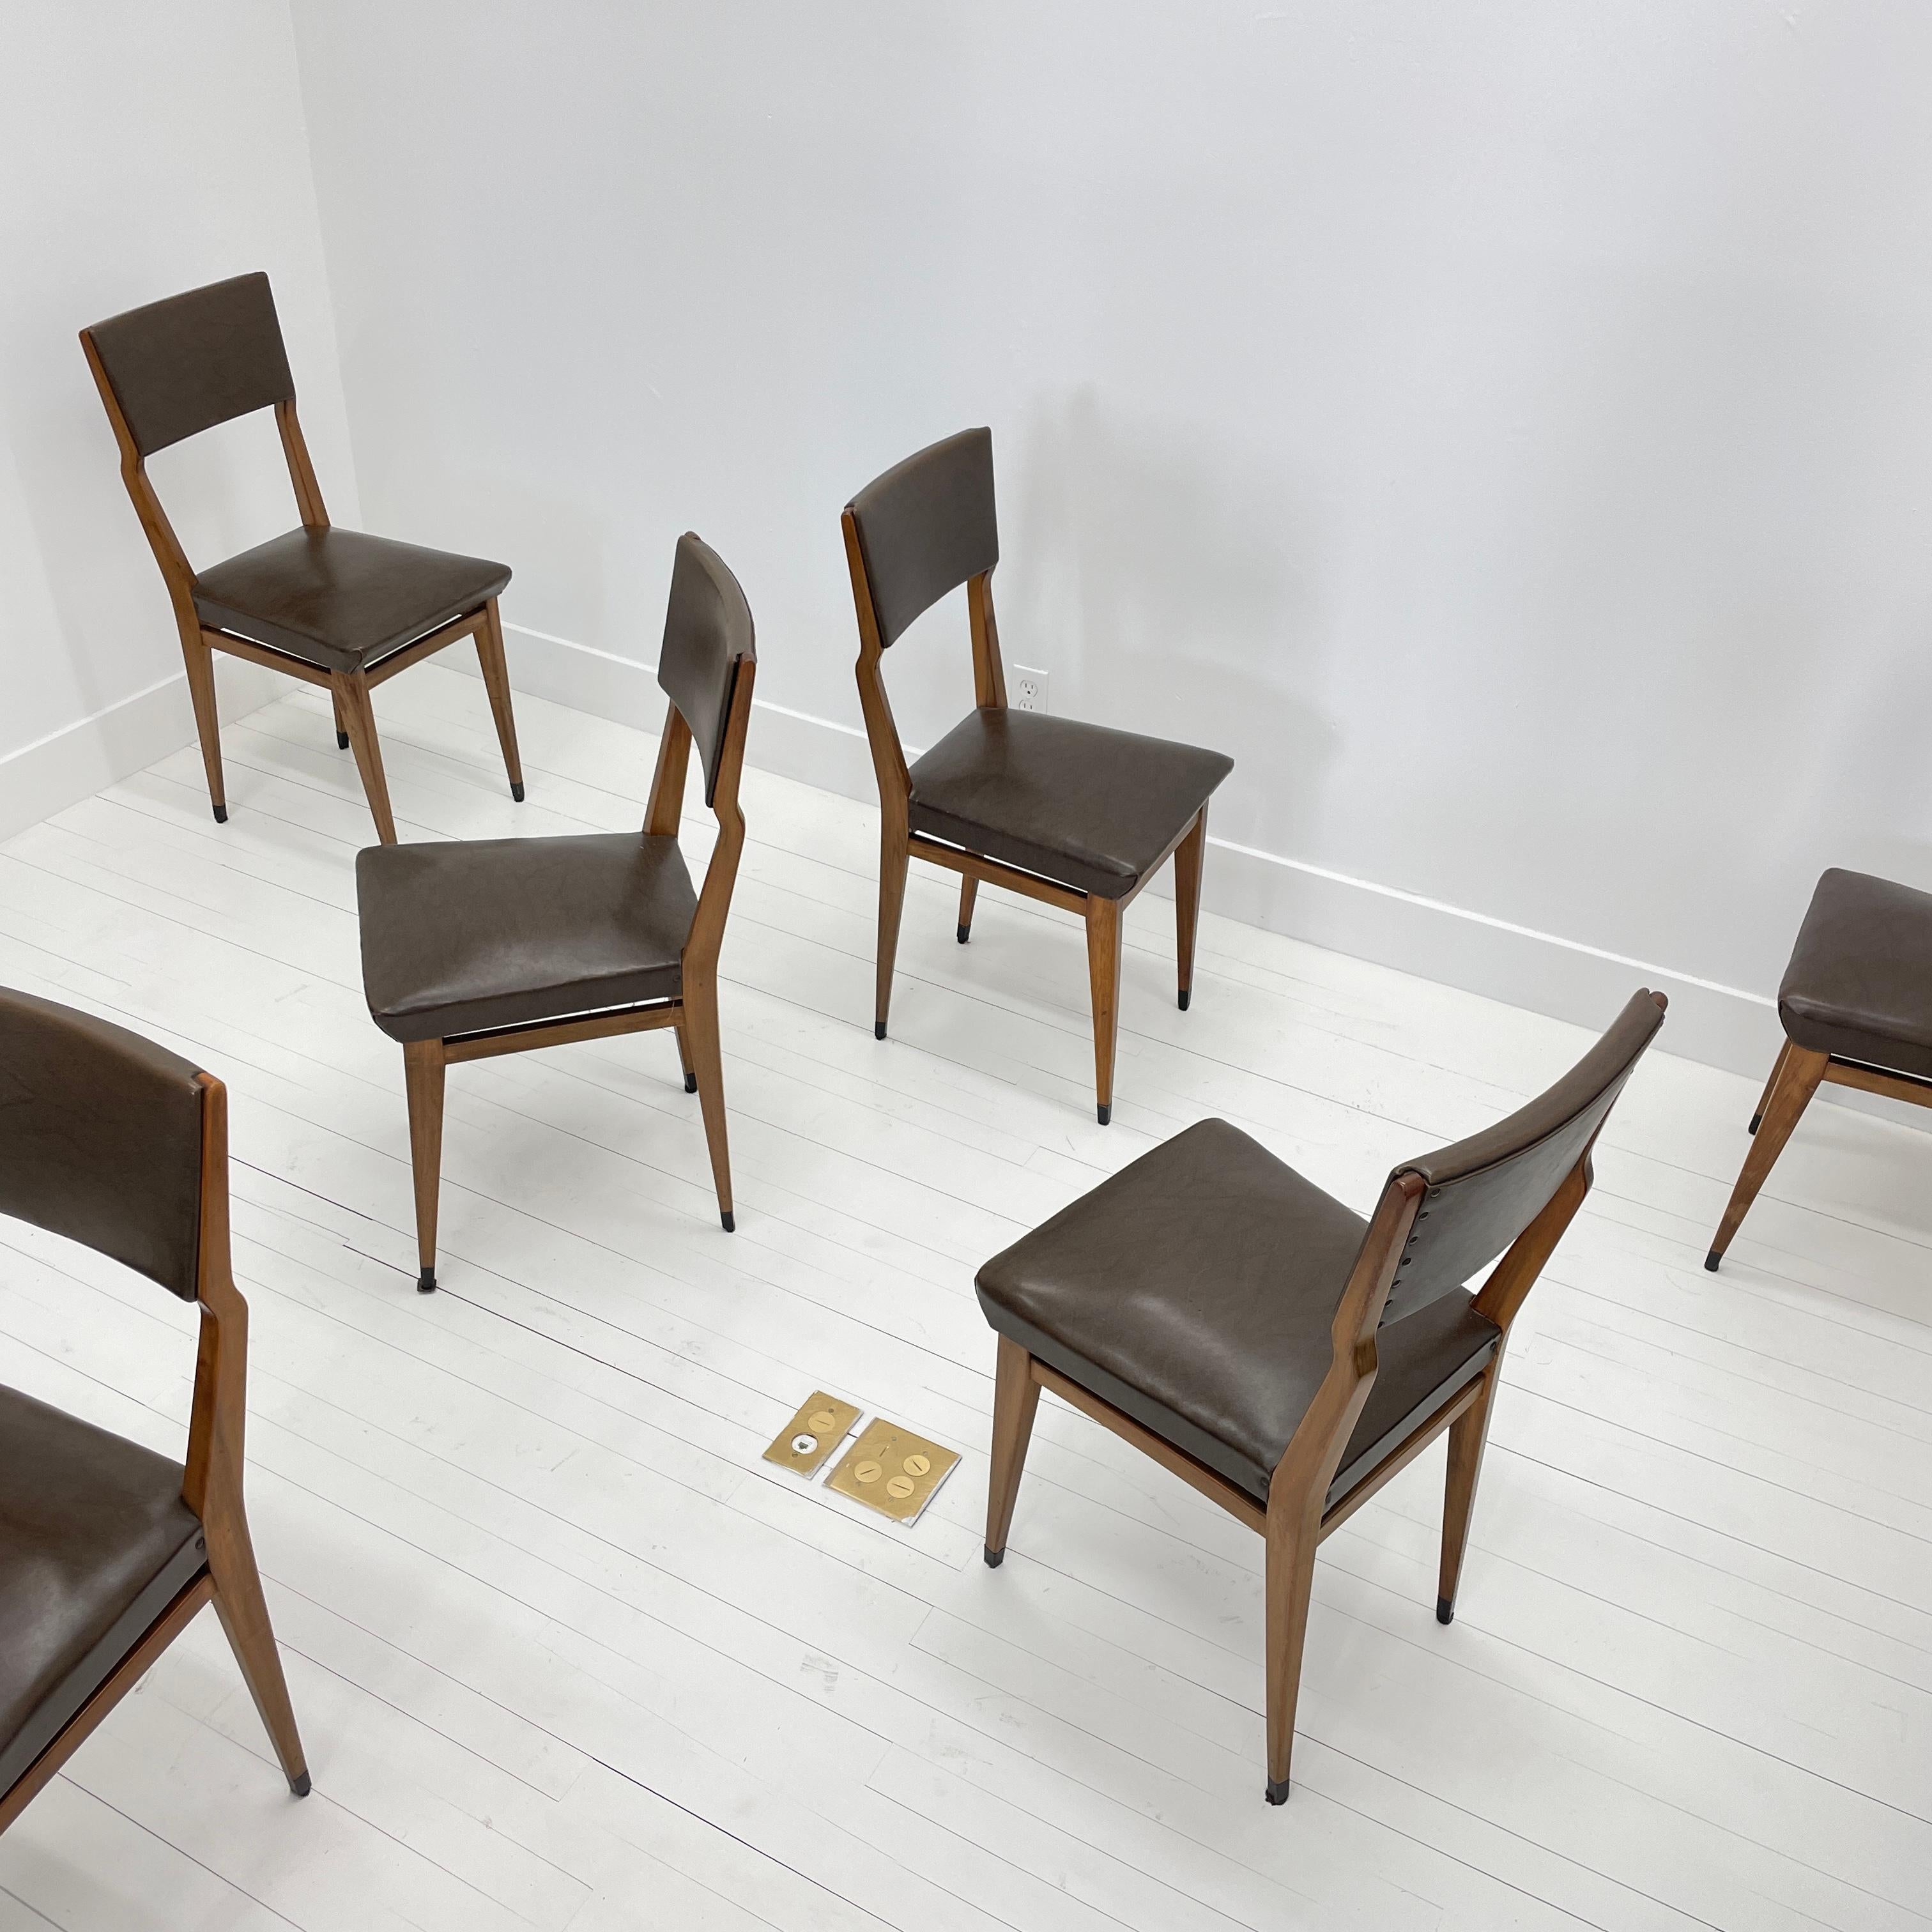 1960's Italian Walnut Dining Chairs, set of 6 For Sale 4